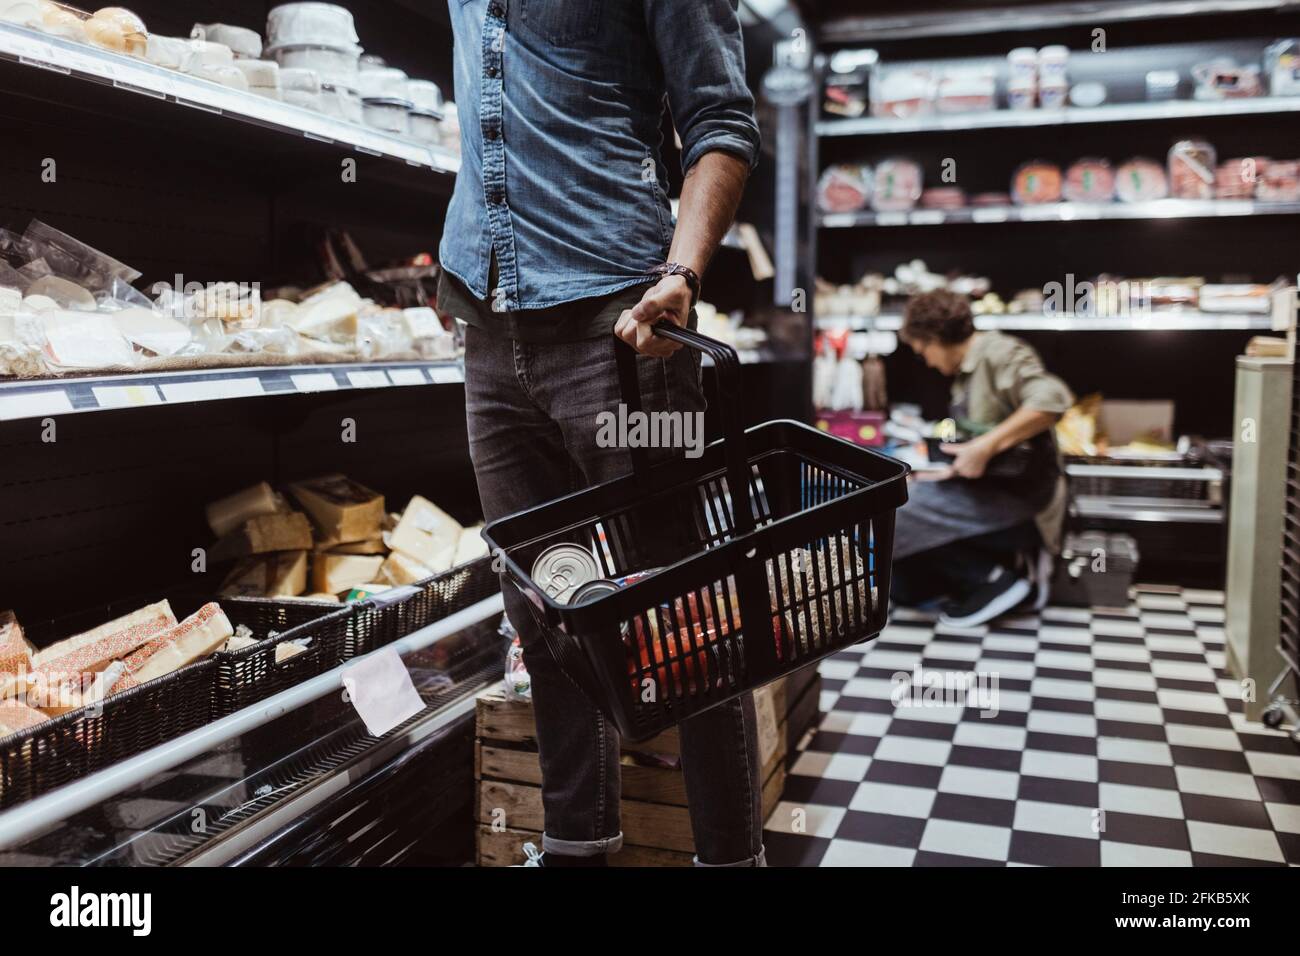 Midsection of male customer holding shopping basket at delicatessen shop Stock Photo